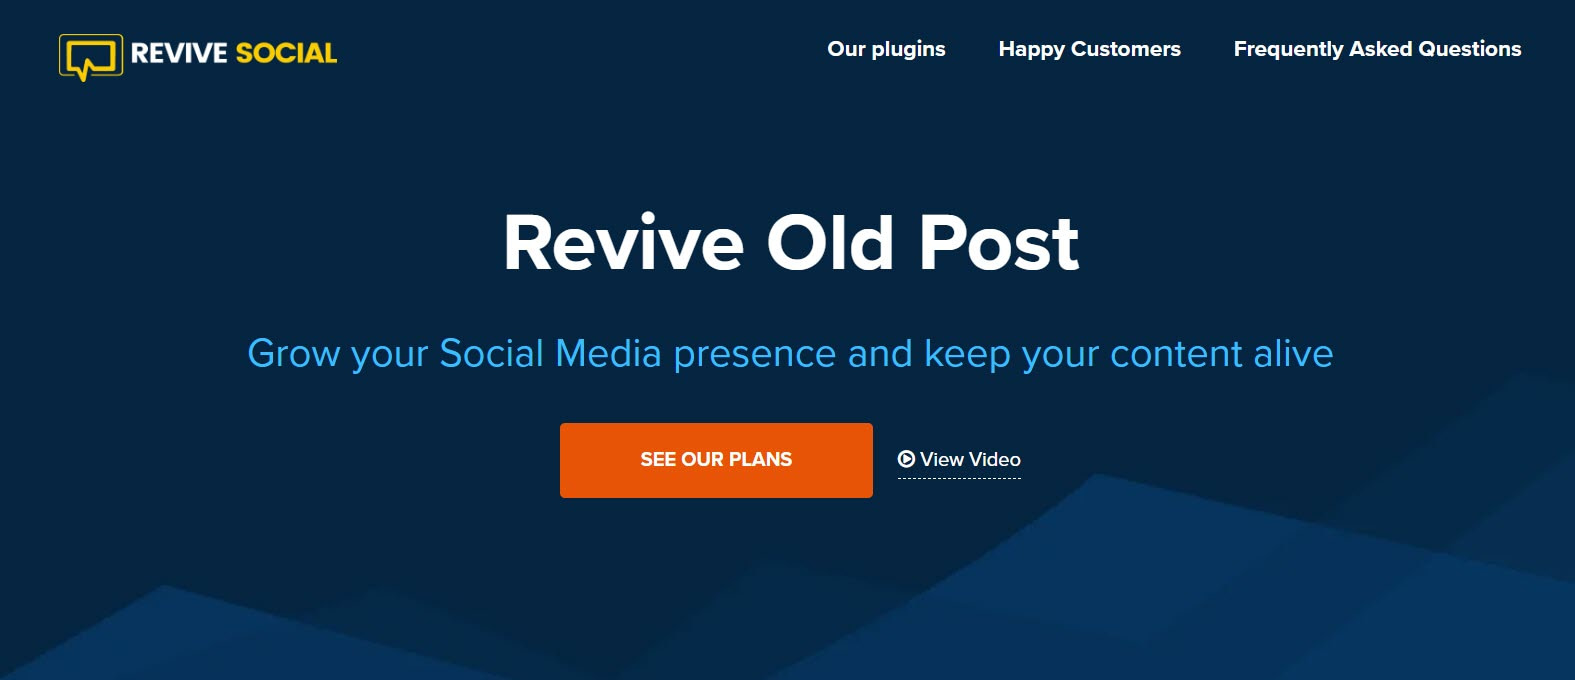 Revive Old Posts is one of the best Lead Generation Tools